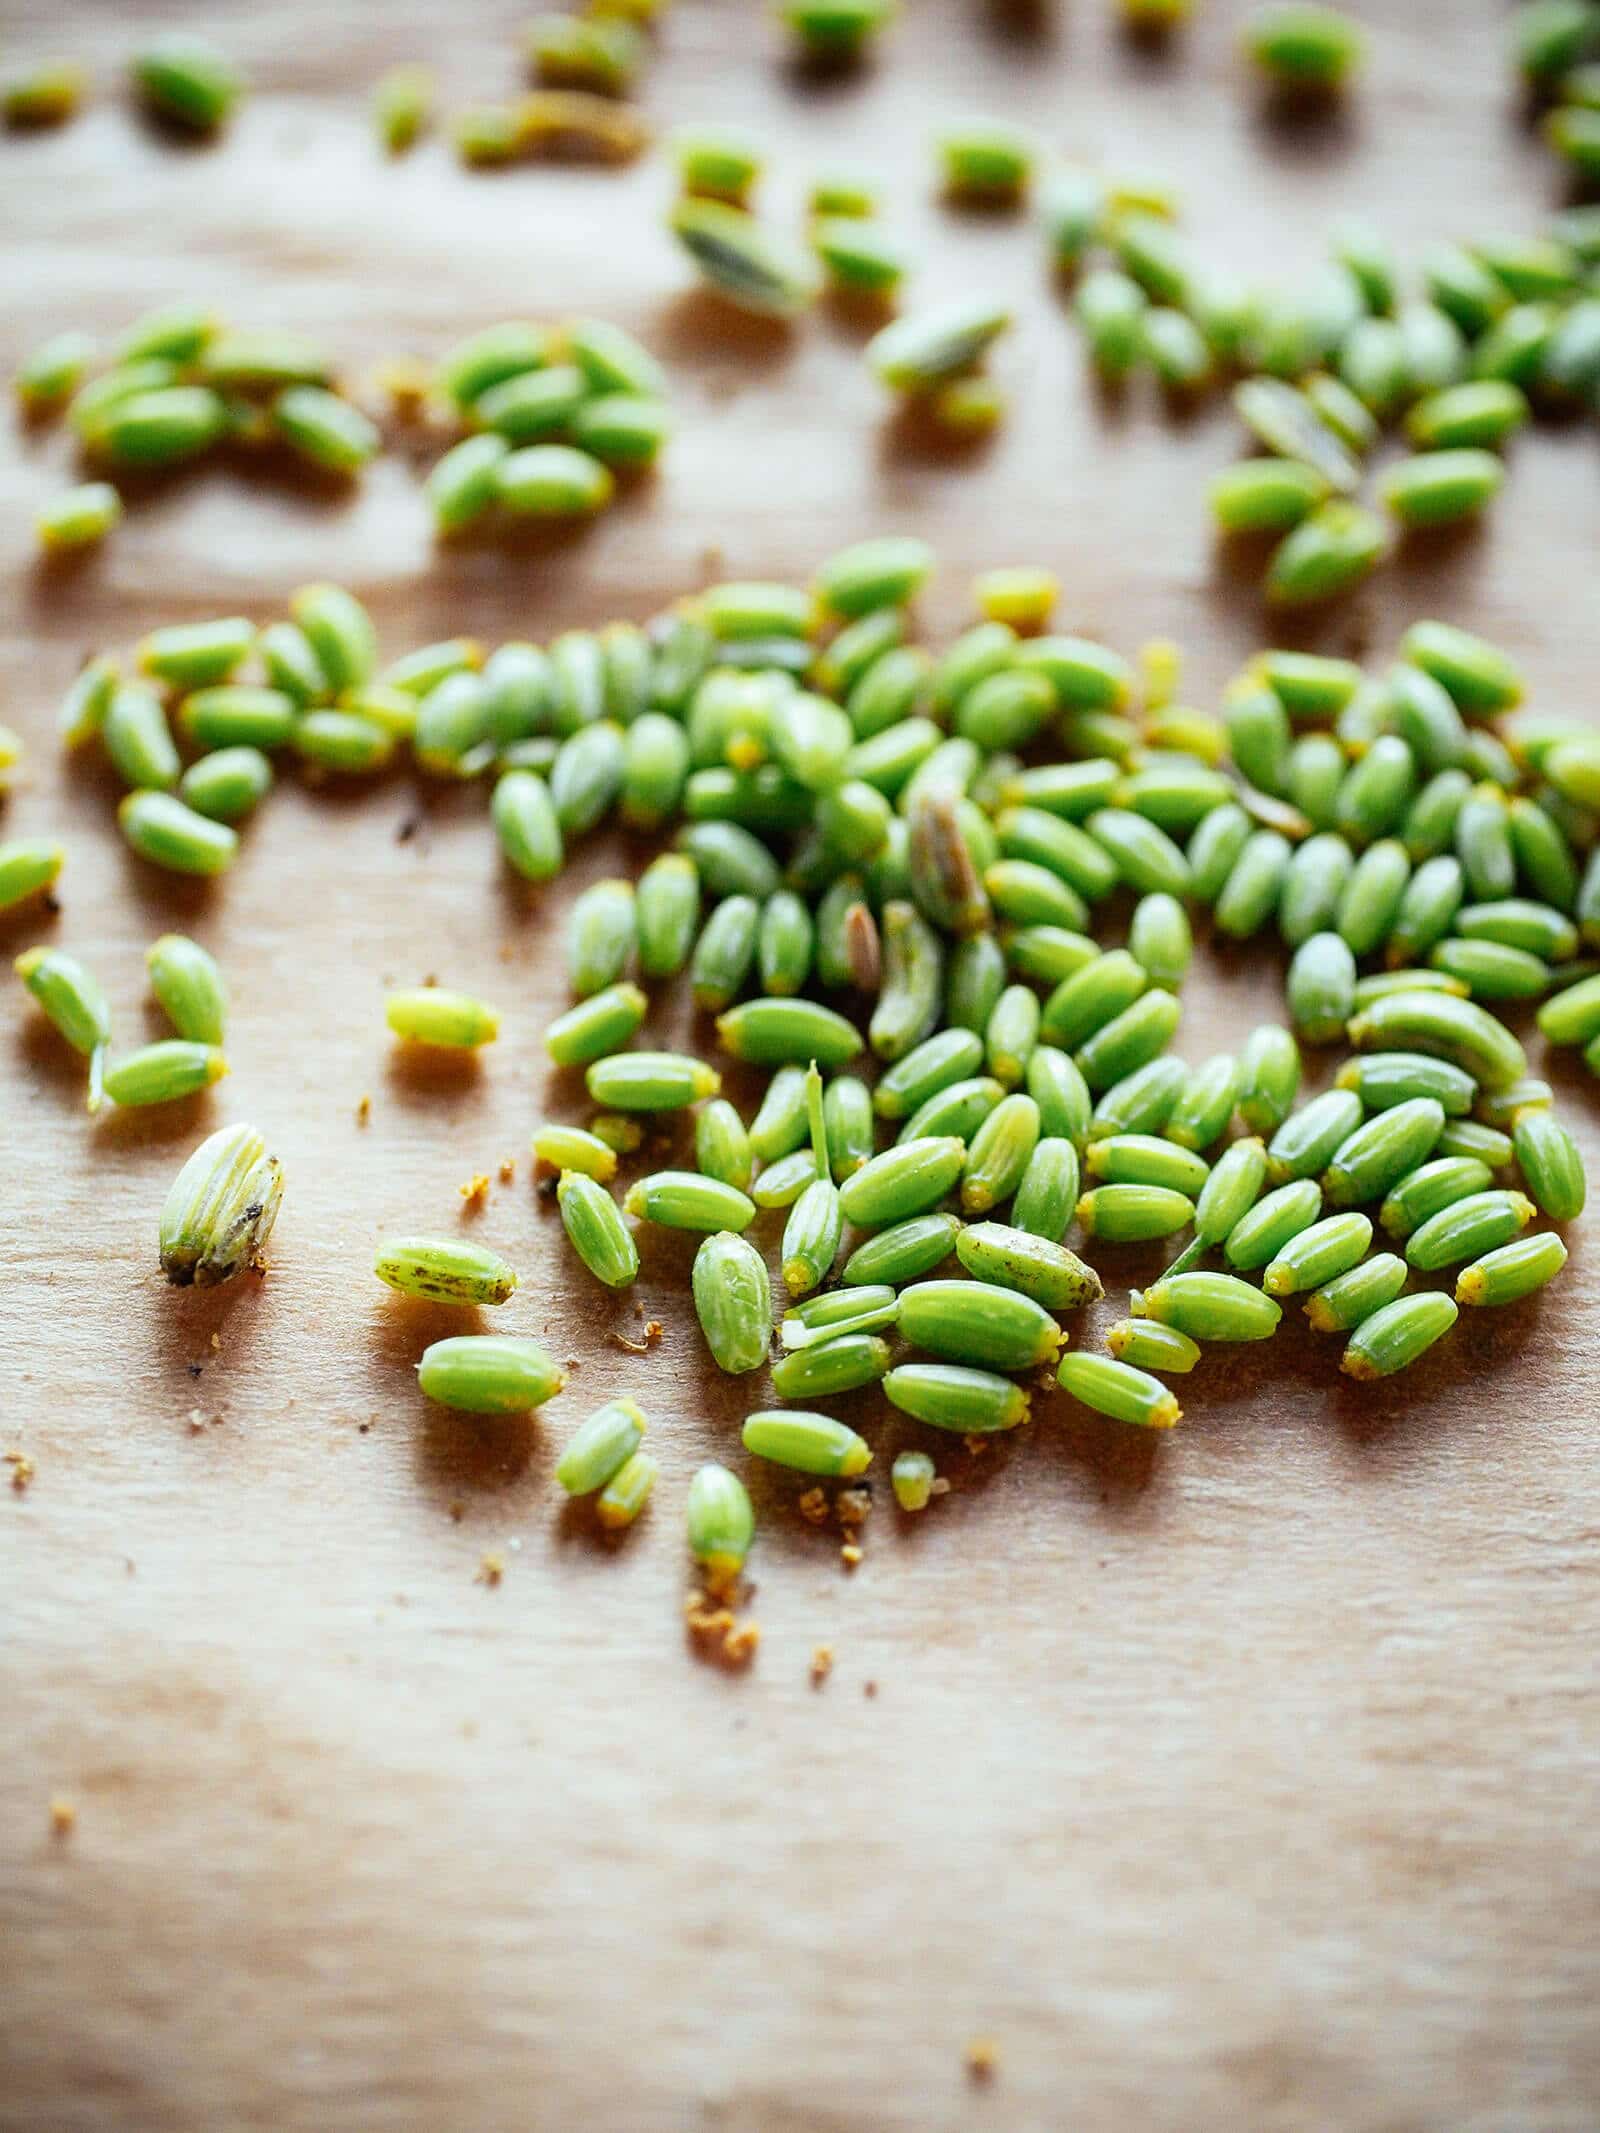 Pile of green fennel seeds on parchment